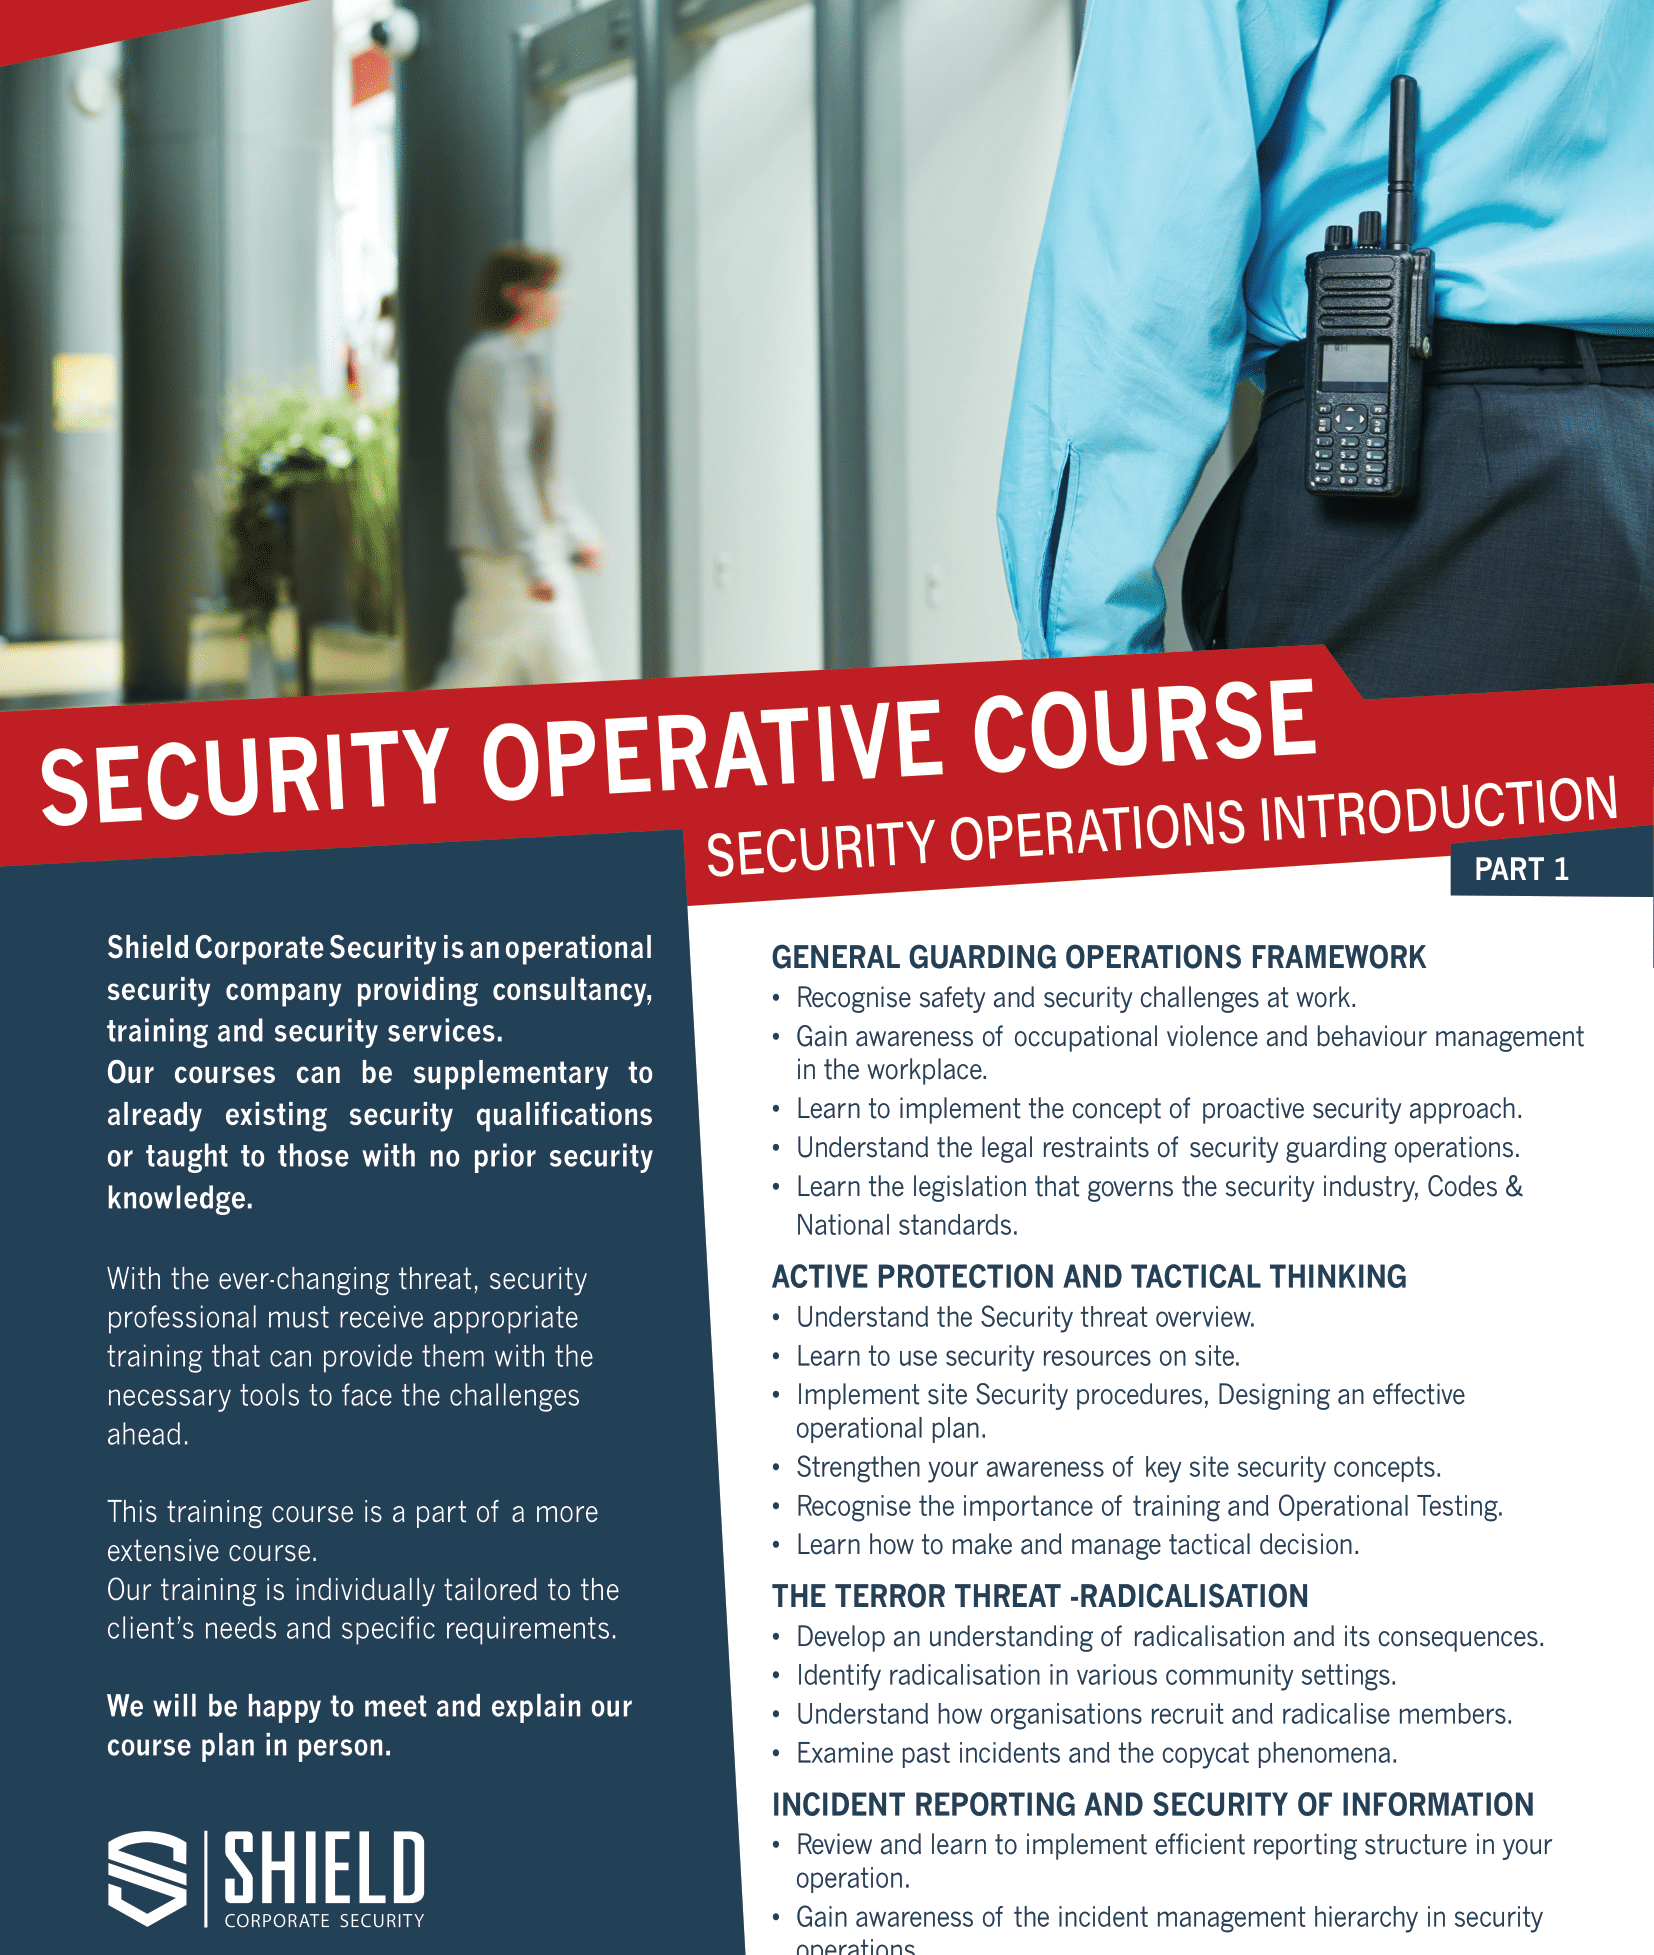 SHIELD-SO1-SECURITY-OPERATORS-INTRODUCTION-PART-1-PUBLICATION-V2-1-640x640